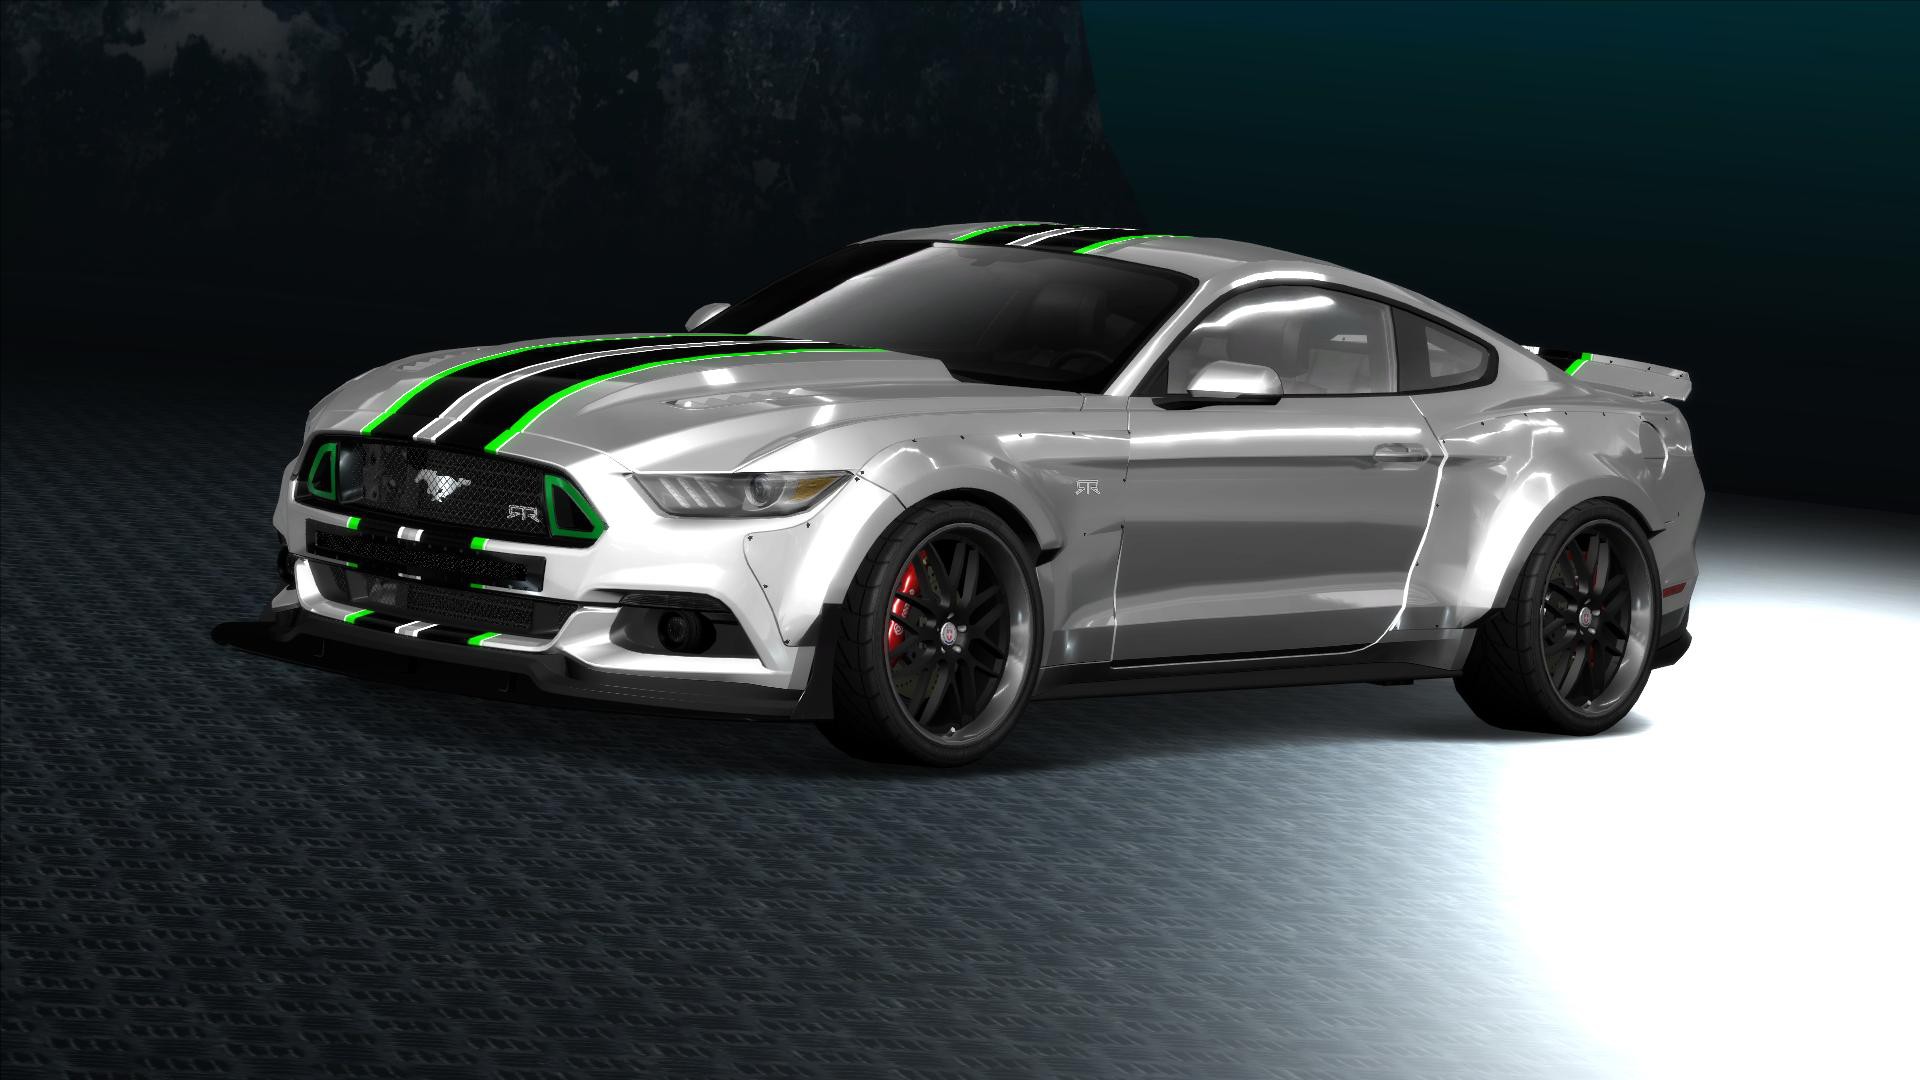 Форд мустанг нфс. Ford Mustang gt 5.0. Ford Mustang RTR spec 3. Мустанг из NFS Payback. Ford Mustang gt 500 RTR.